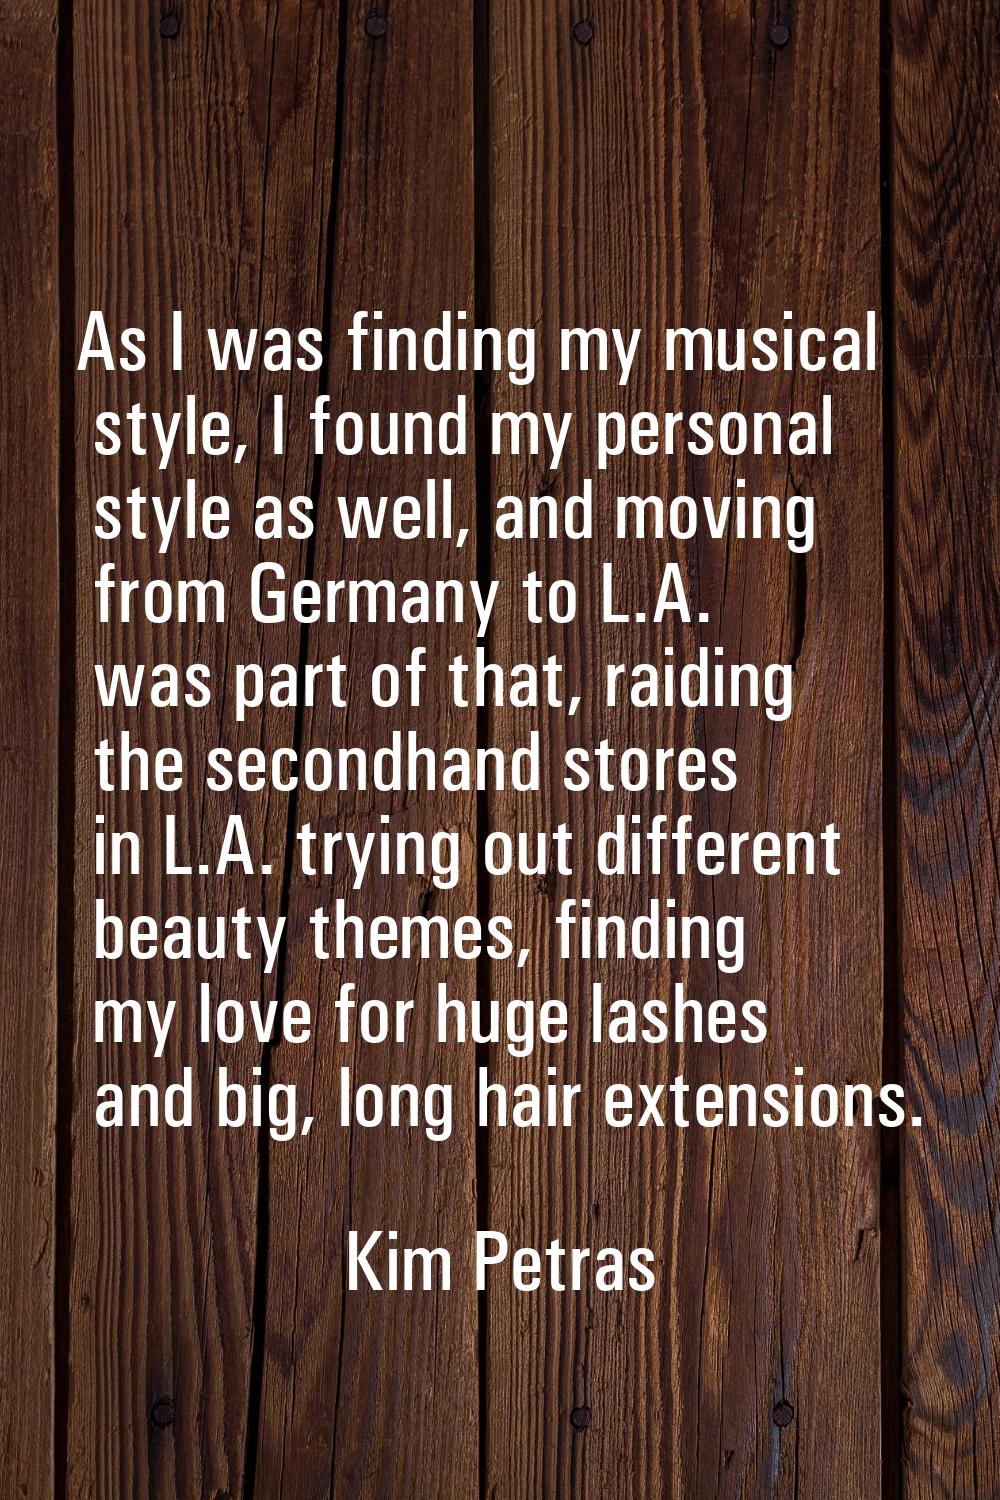 As I was finding my musical style, I found my personal style as well, and moving from Germany to L.